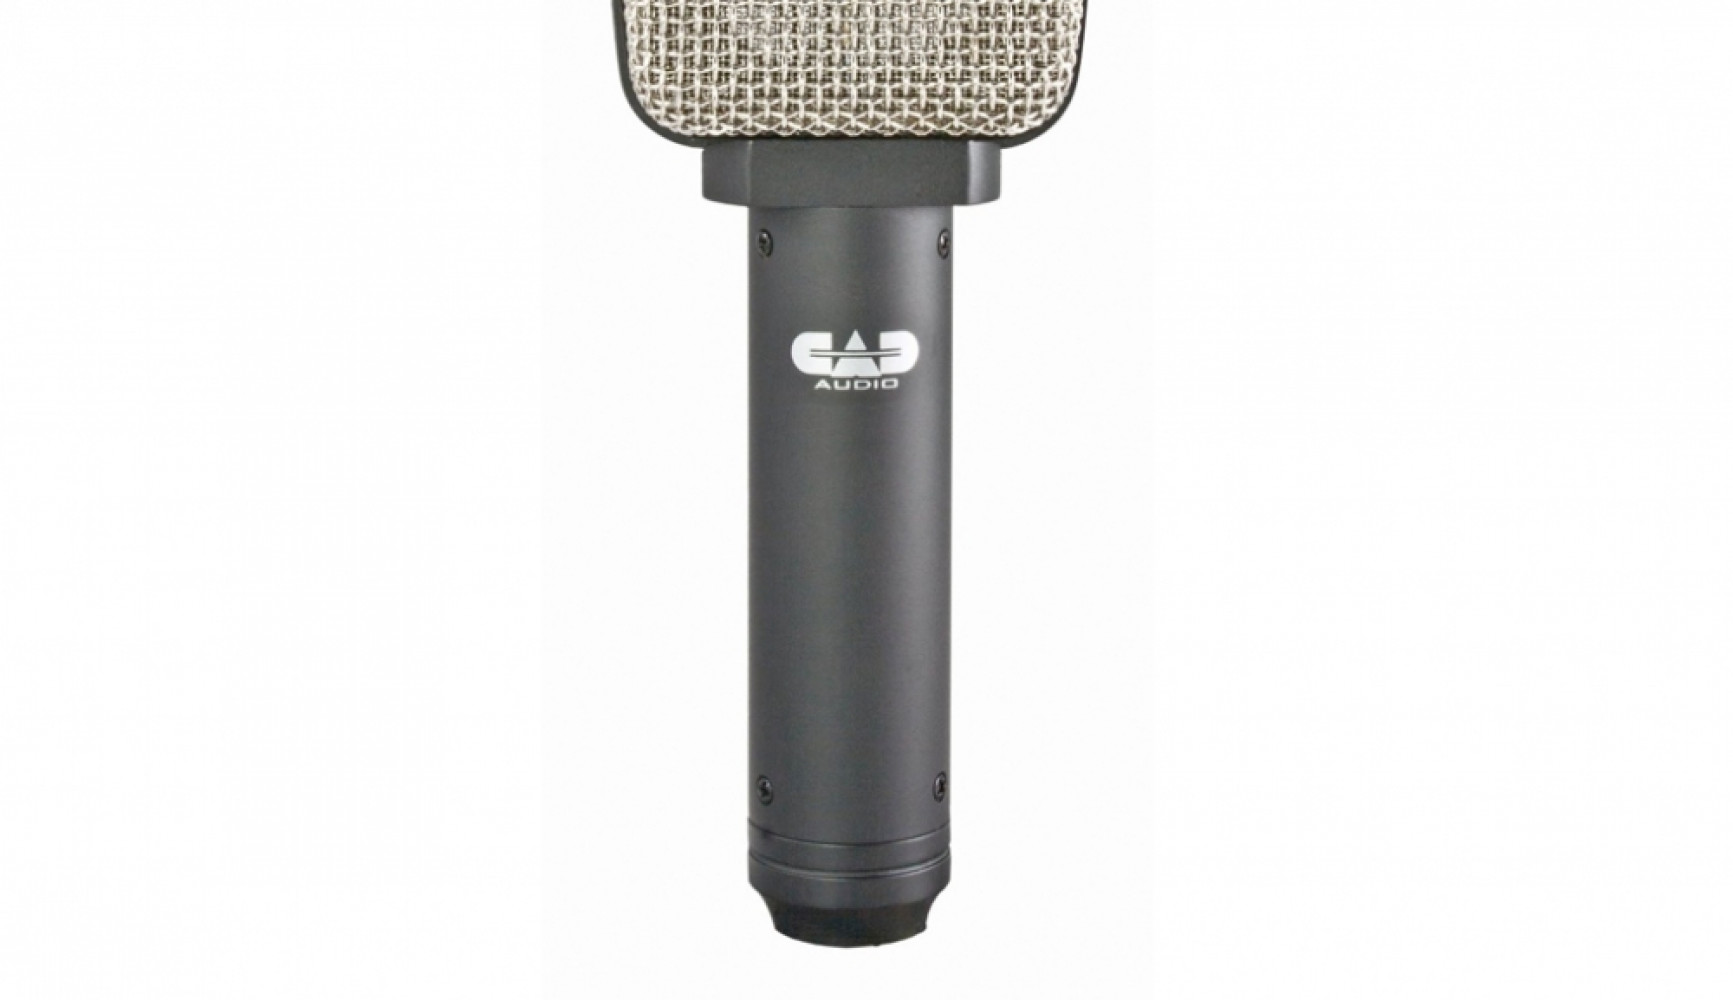 CAD Audio D80 Supercardioid Dynamic Cabinet/Percussion Microphone